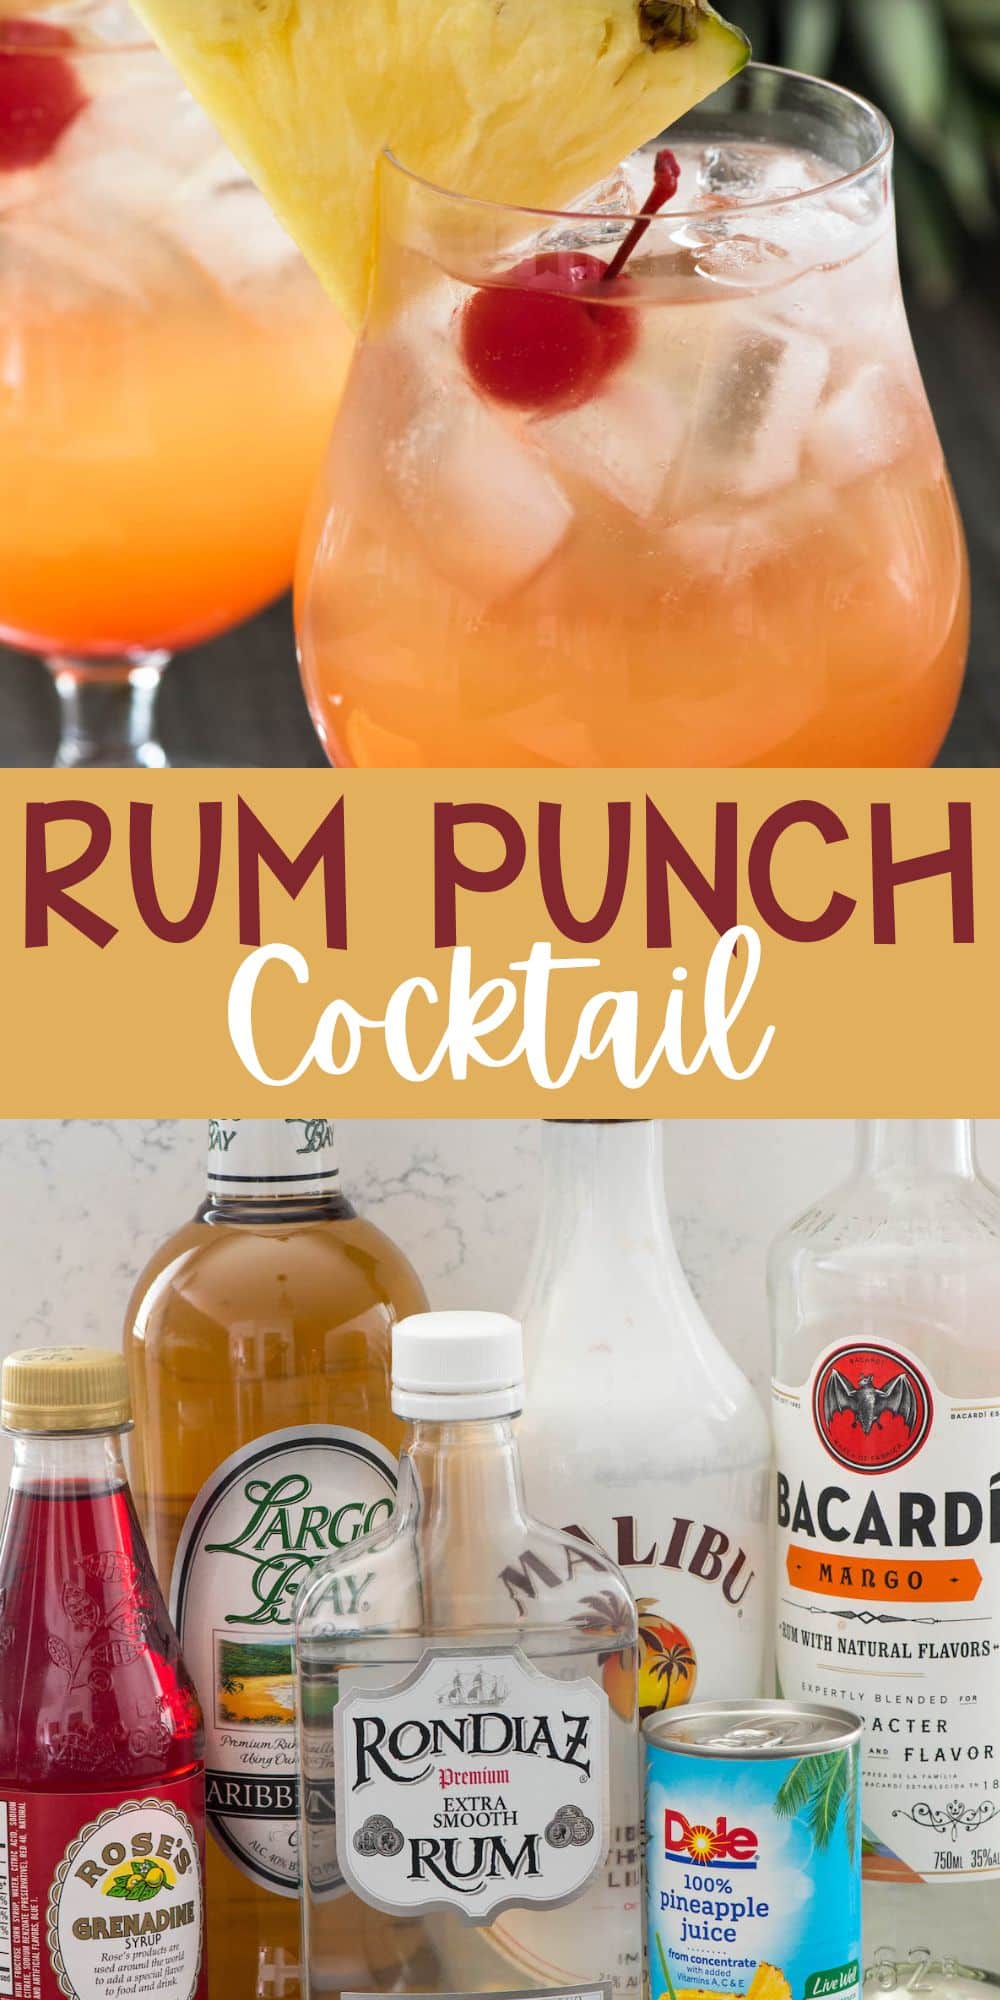 It's the fun punch aka the RUM PUNCH 4 me!? 🍹 Who loves rum punch more  than me!? 👴🏿👴🏿👴🏿👴🏿👴🏿‼️‼️‼️‼️🇯🇲🌴